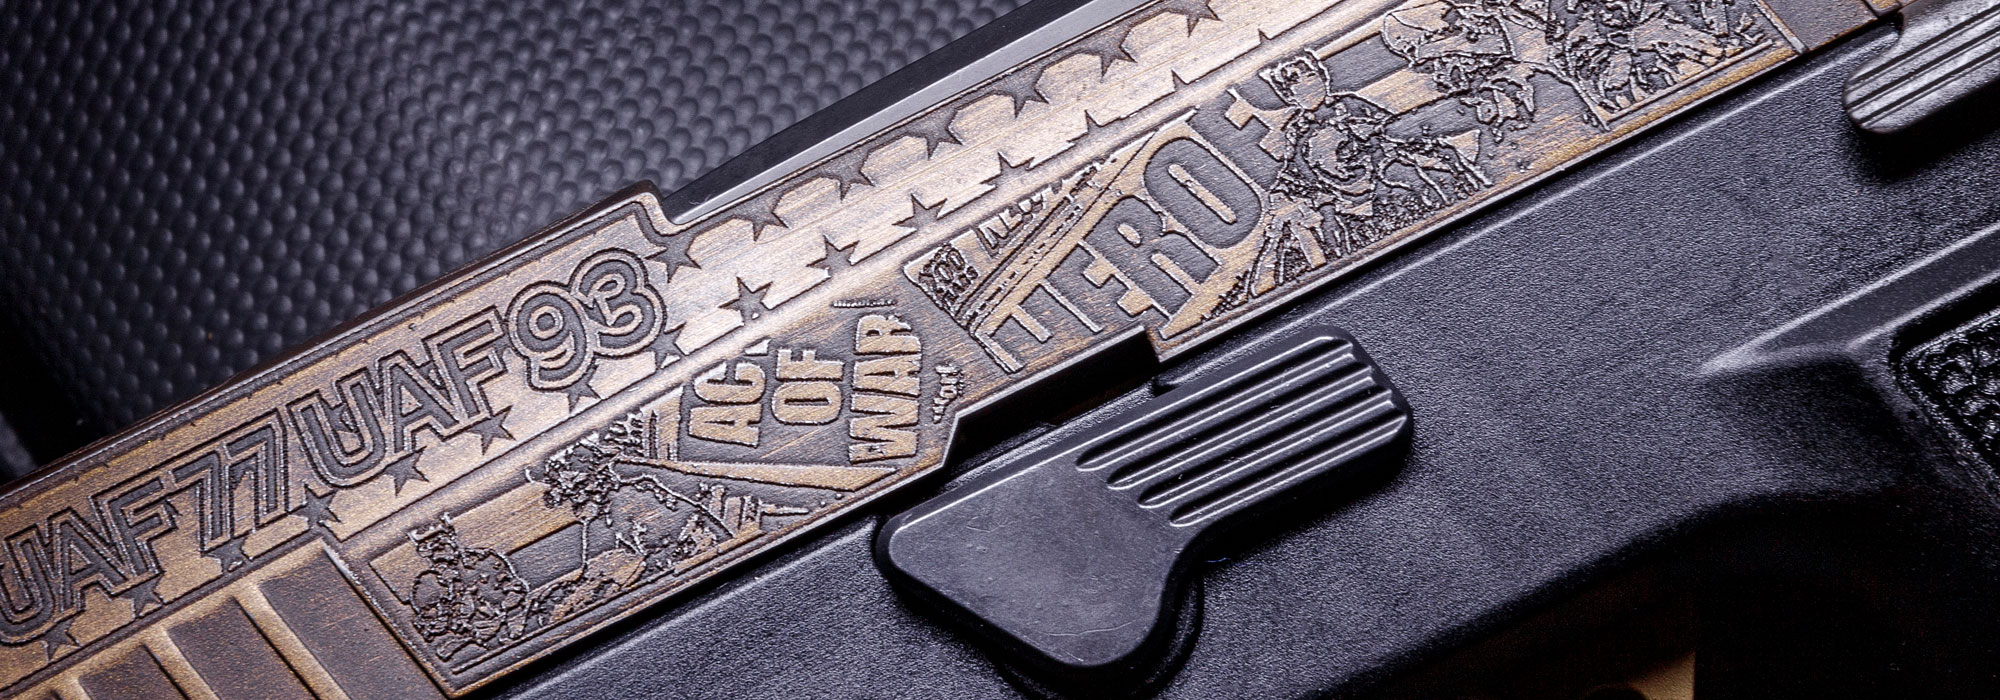 Guns & Ammo/SIG SAUER P320 FCU “Never Forget 9/11 Tribute” Pistol side view engravings close up